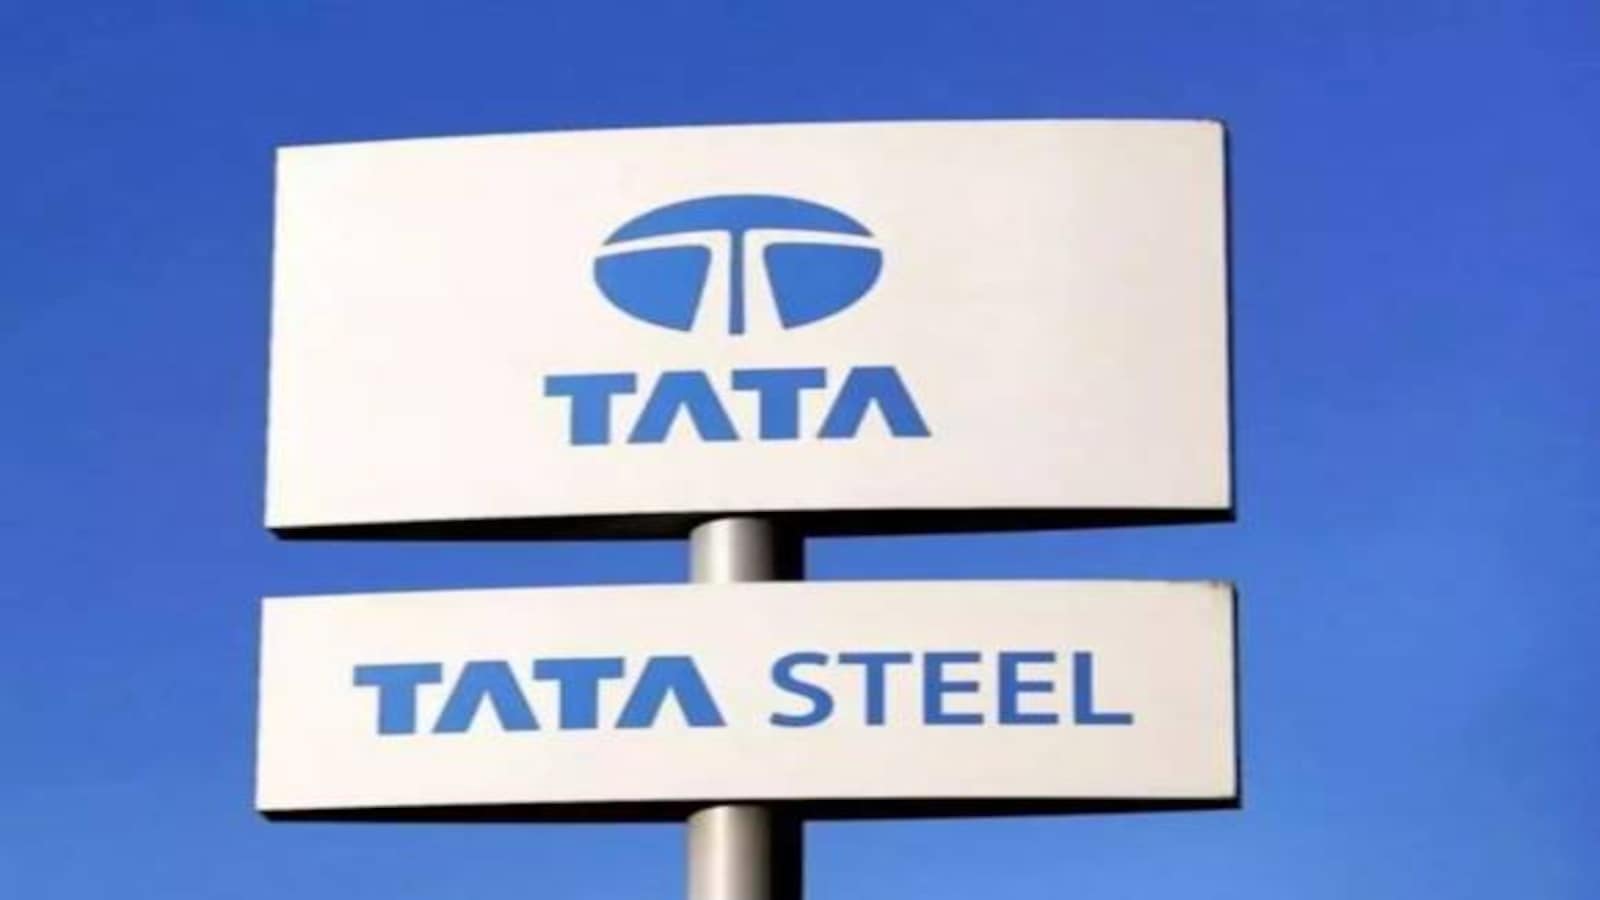 Tata Steel and Dow to invest in green chemicals